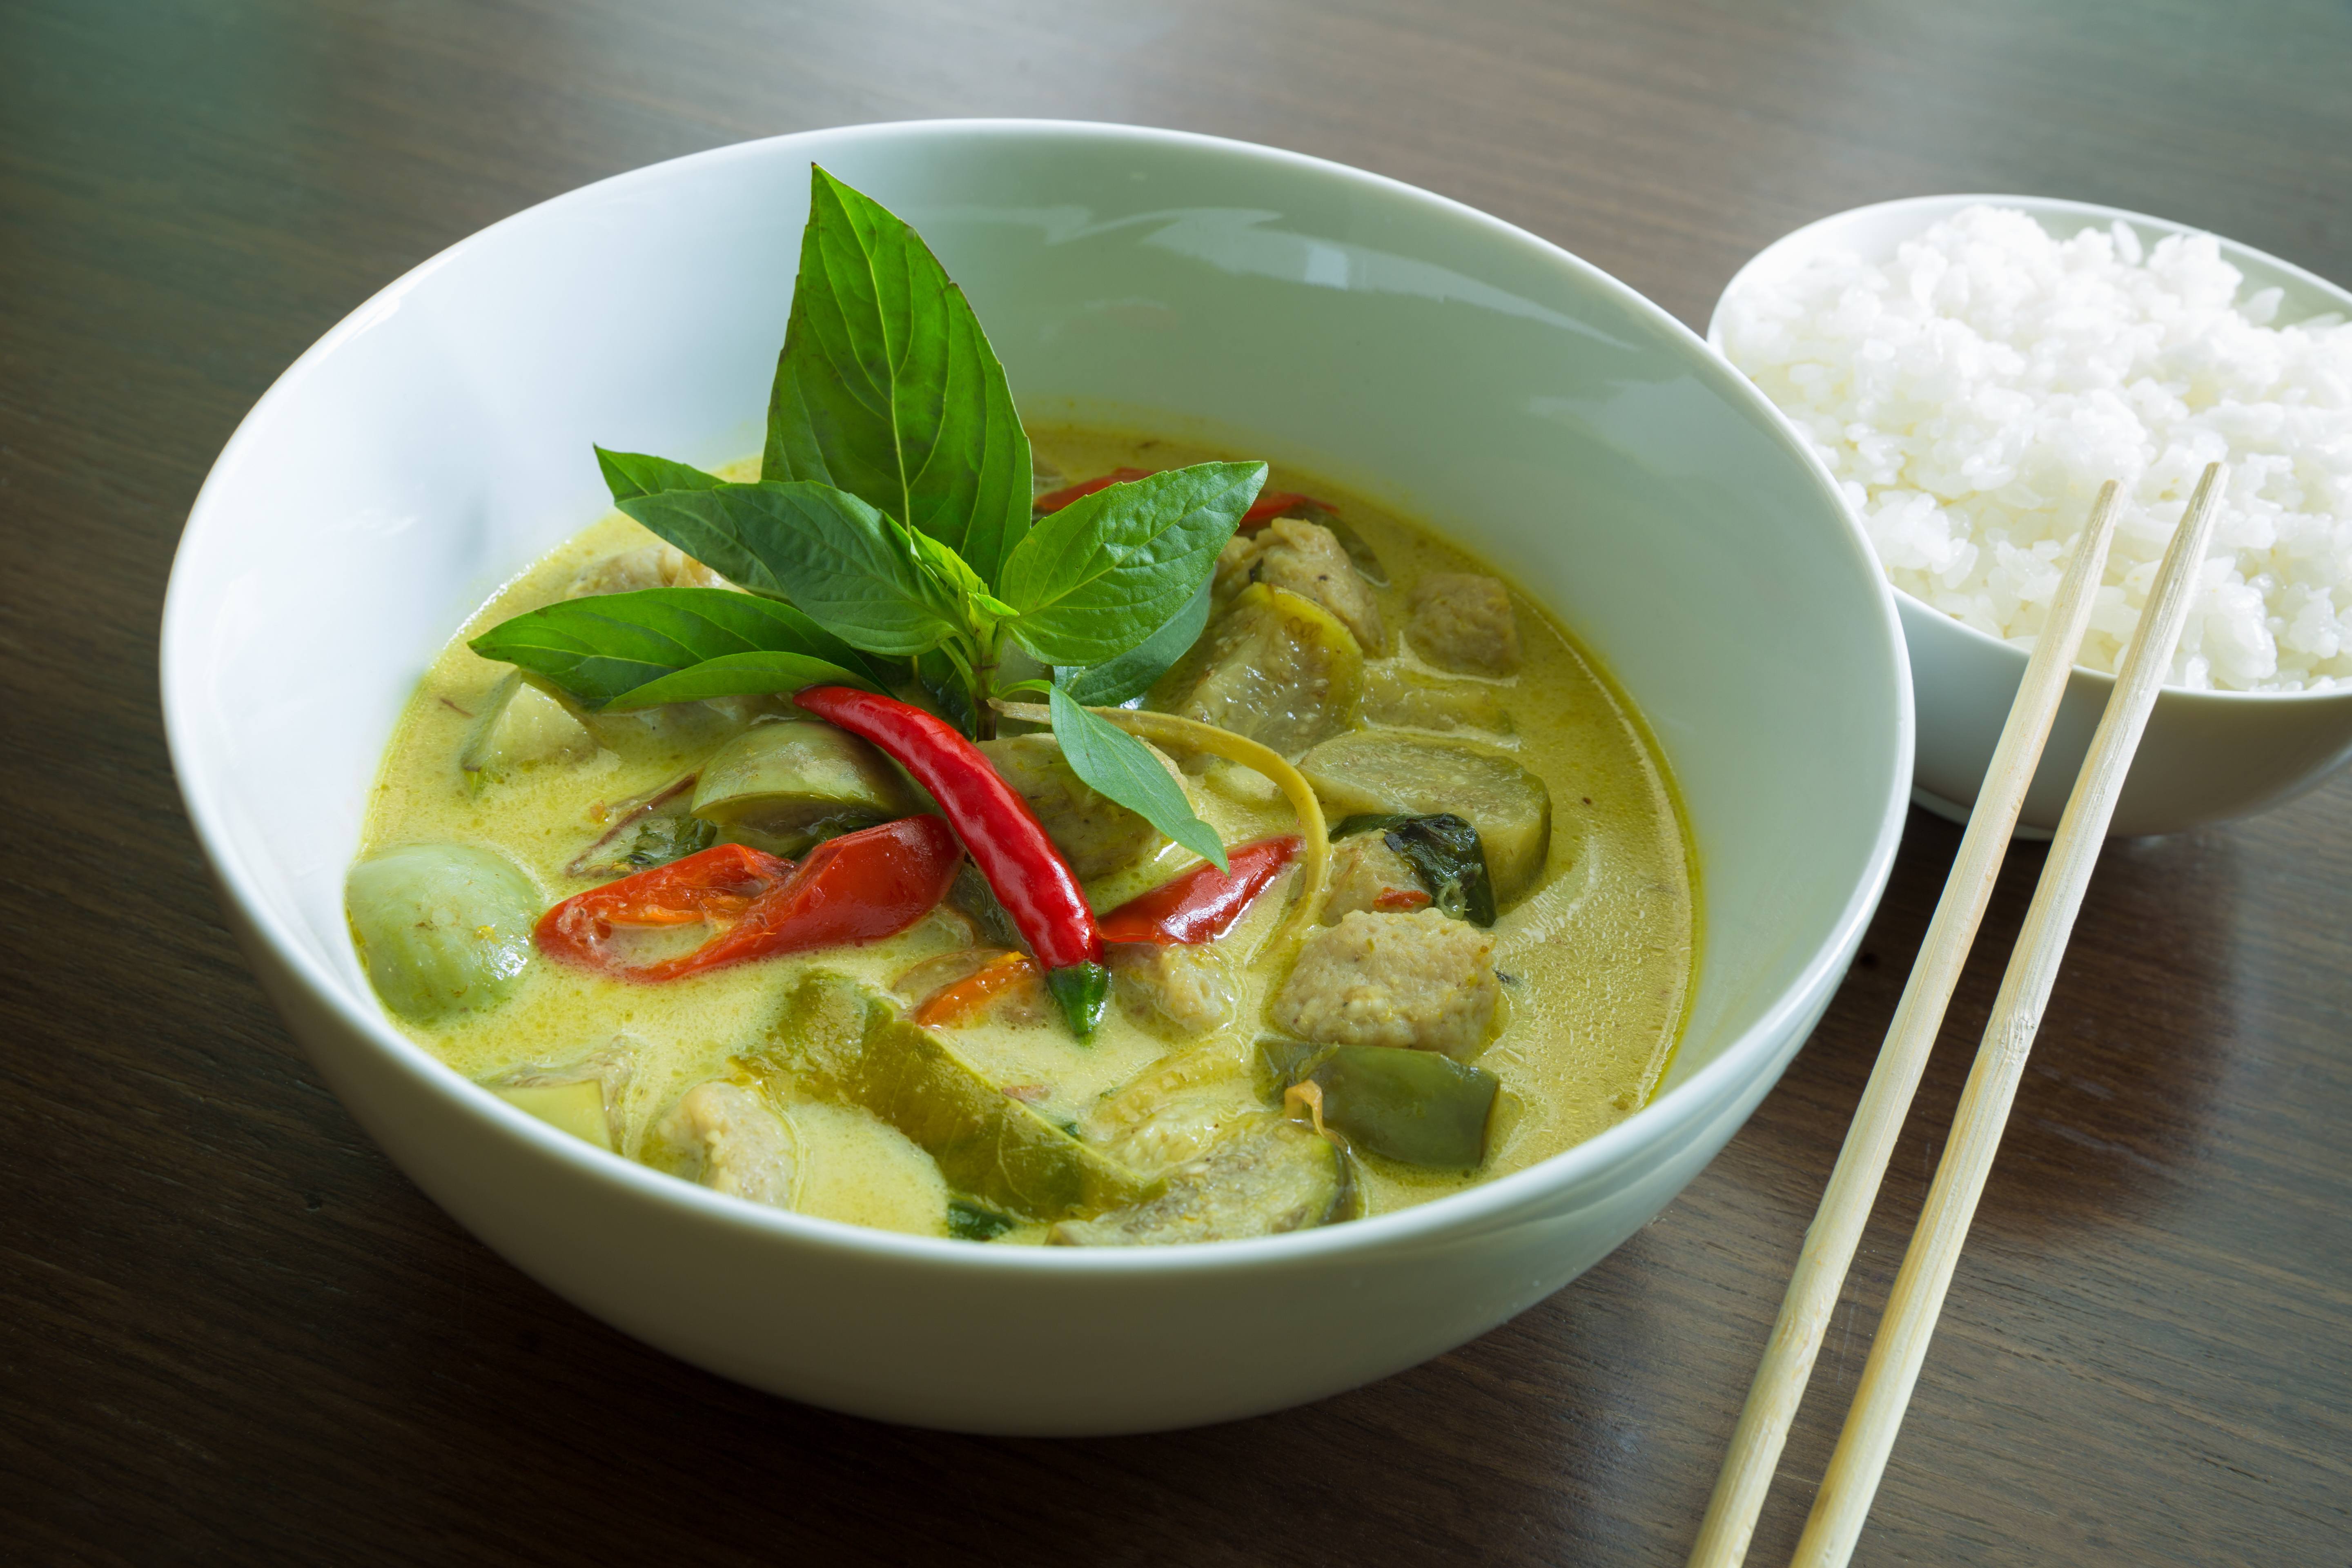 Thai Green Curry Chicken Recipe by The Daily Meal Staff